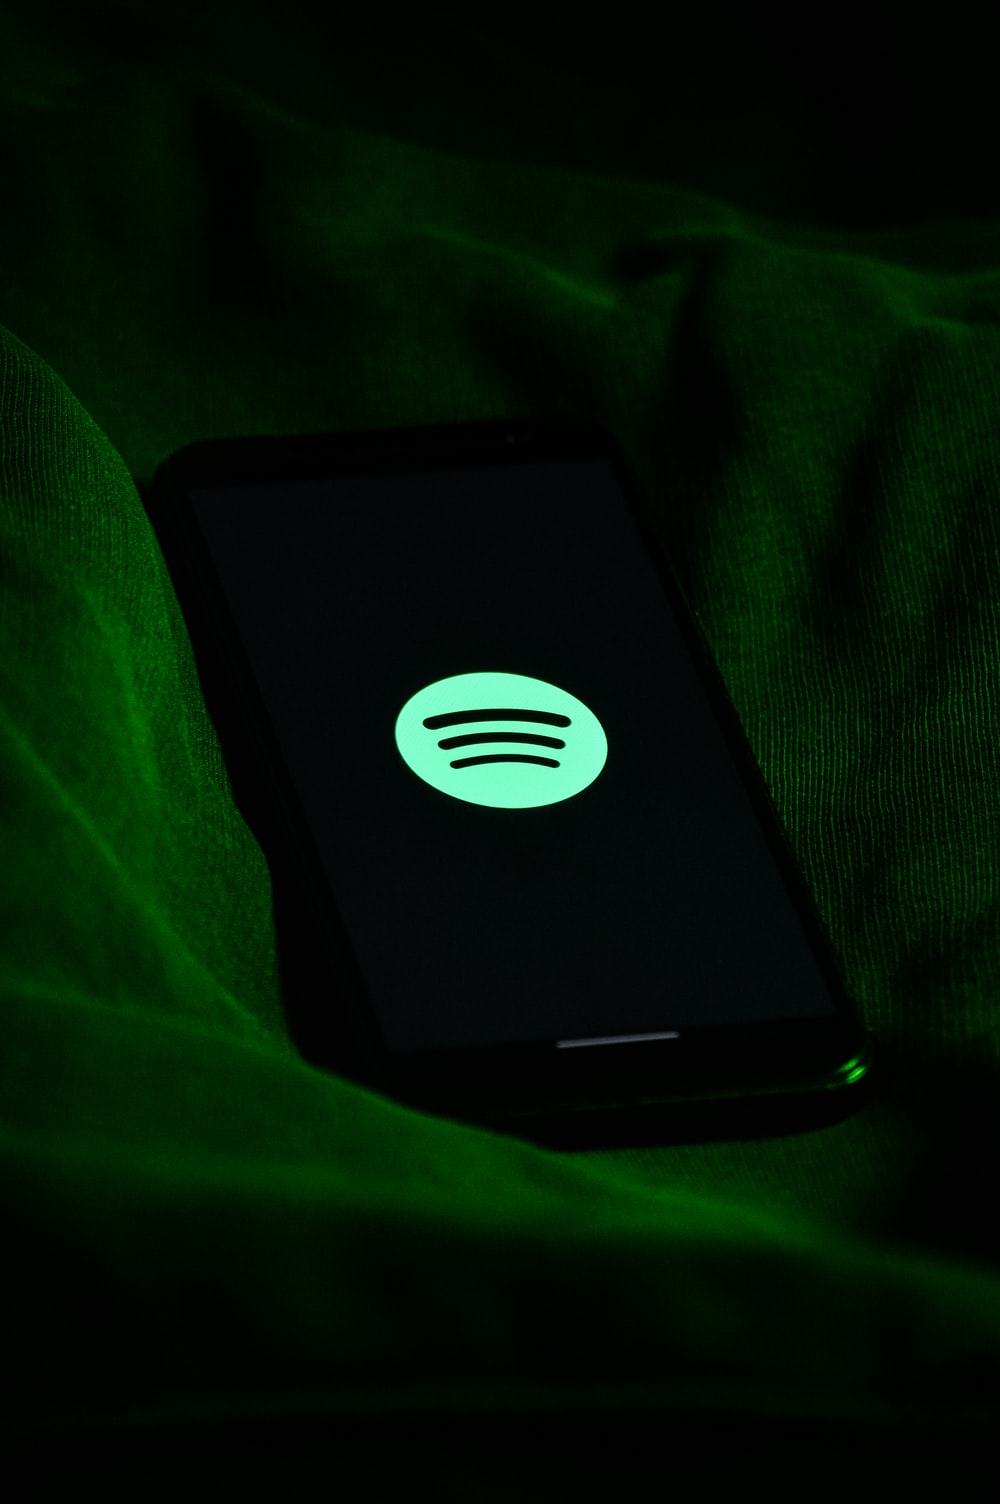 Spotify Picture [HD]. Download Free Image